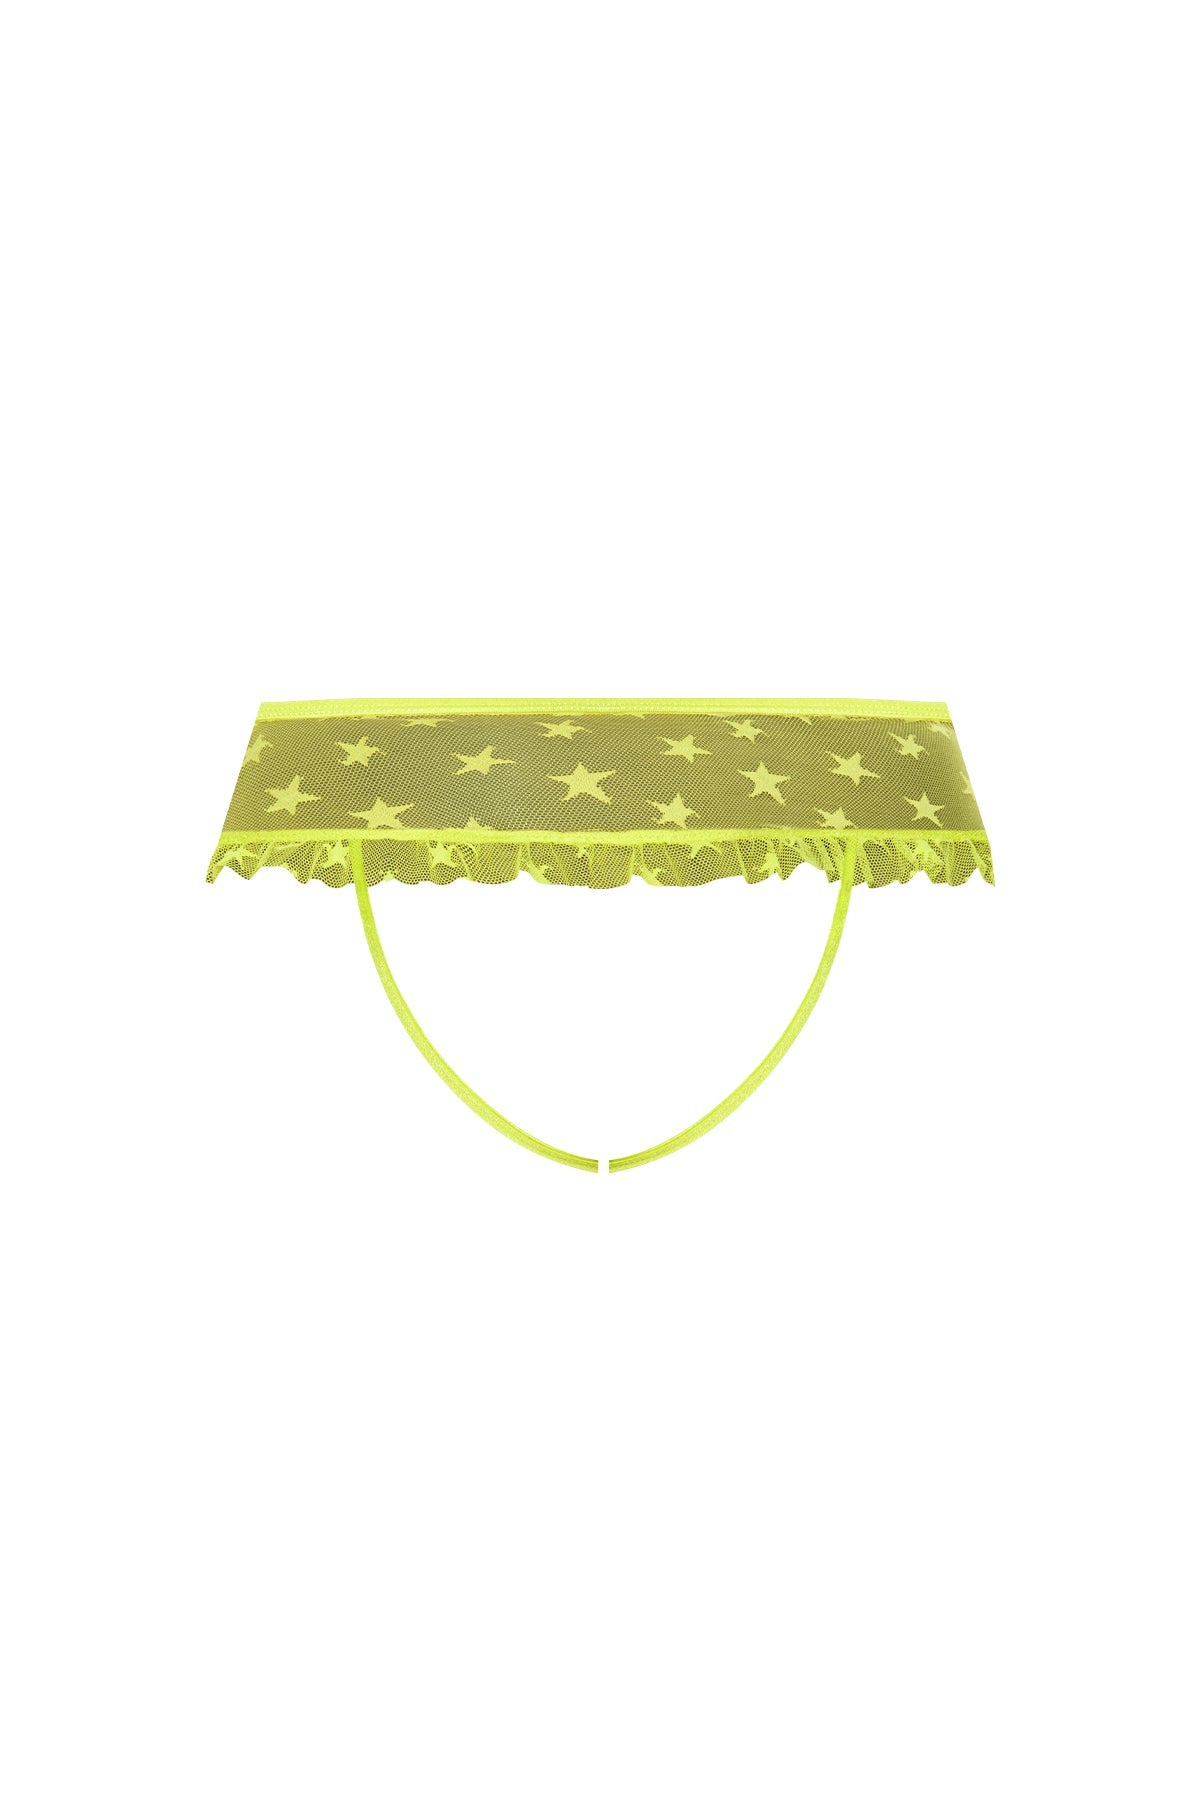 Magic Silk Love Star Skirted Hipster with Open Crotch Panty Neon Chartreuse